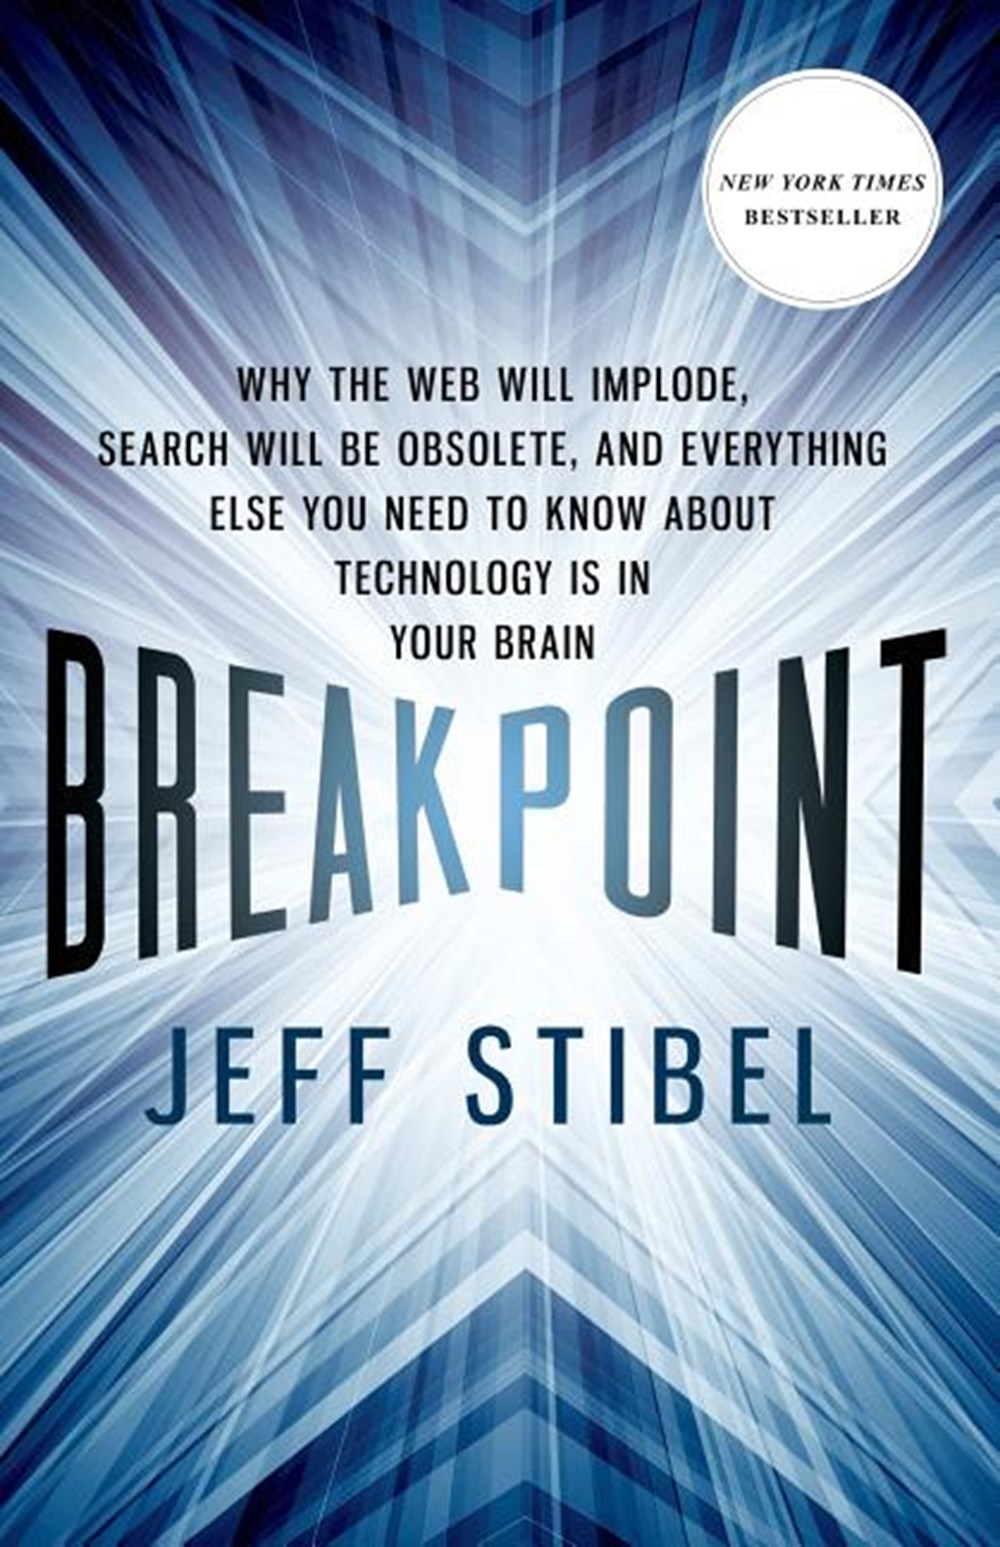 Breakpoint: Why the Web Will Implode, Search Will Be Obsolete, and Everything Else You Need to Know 